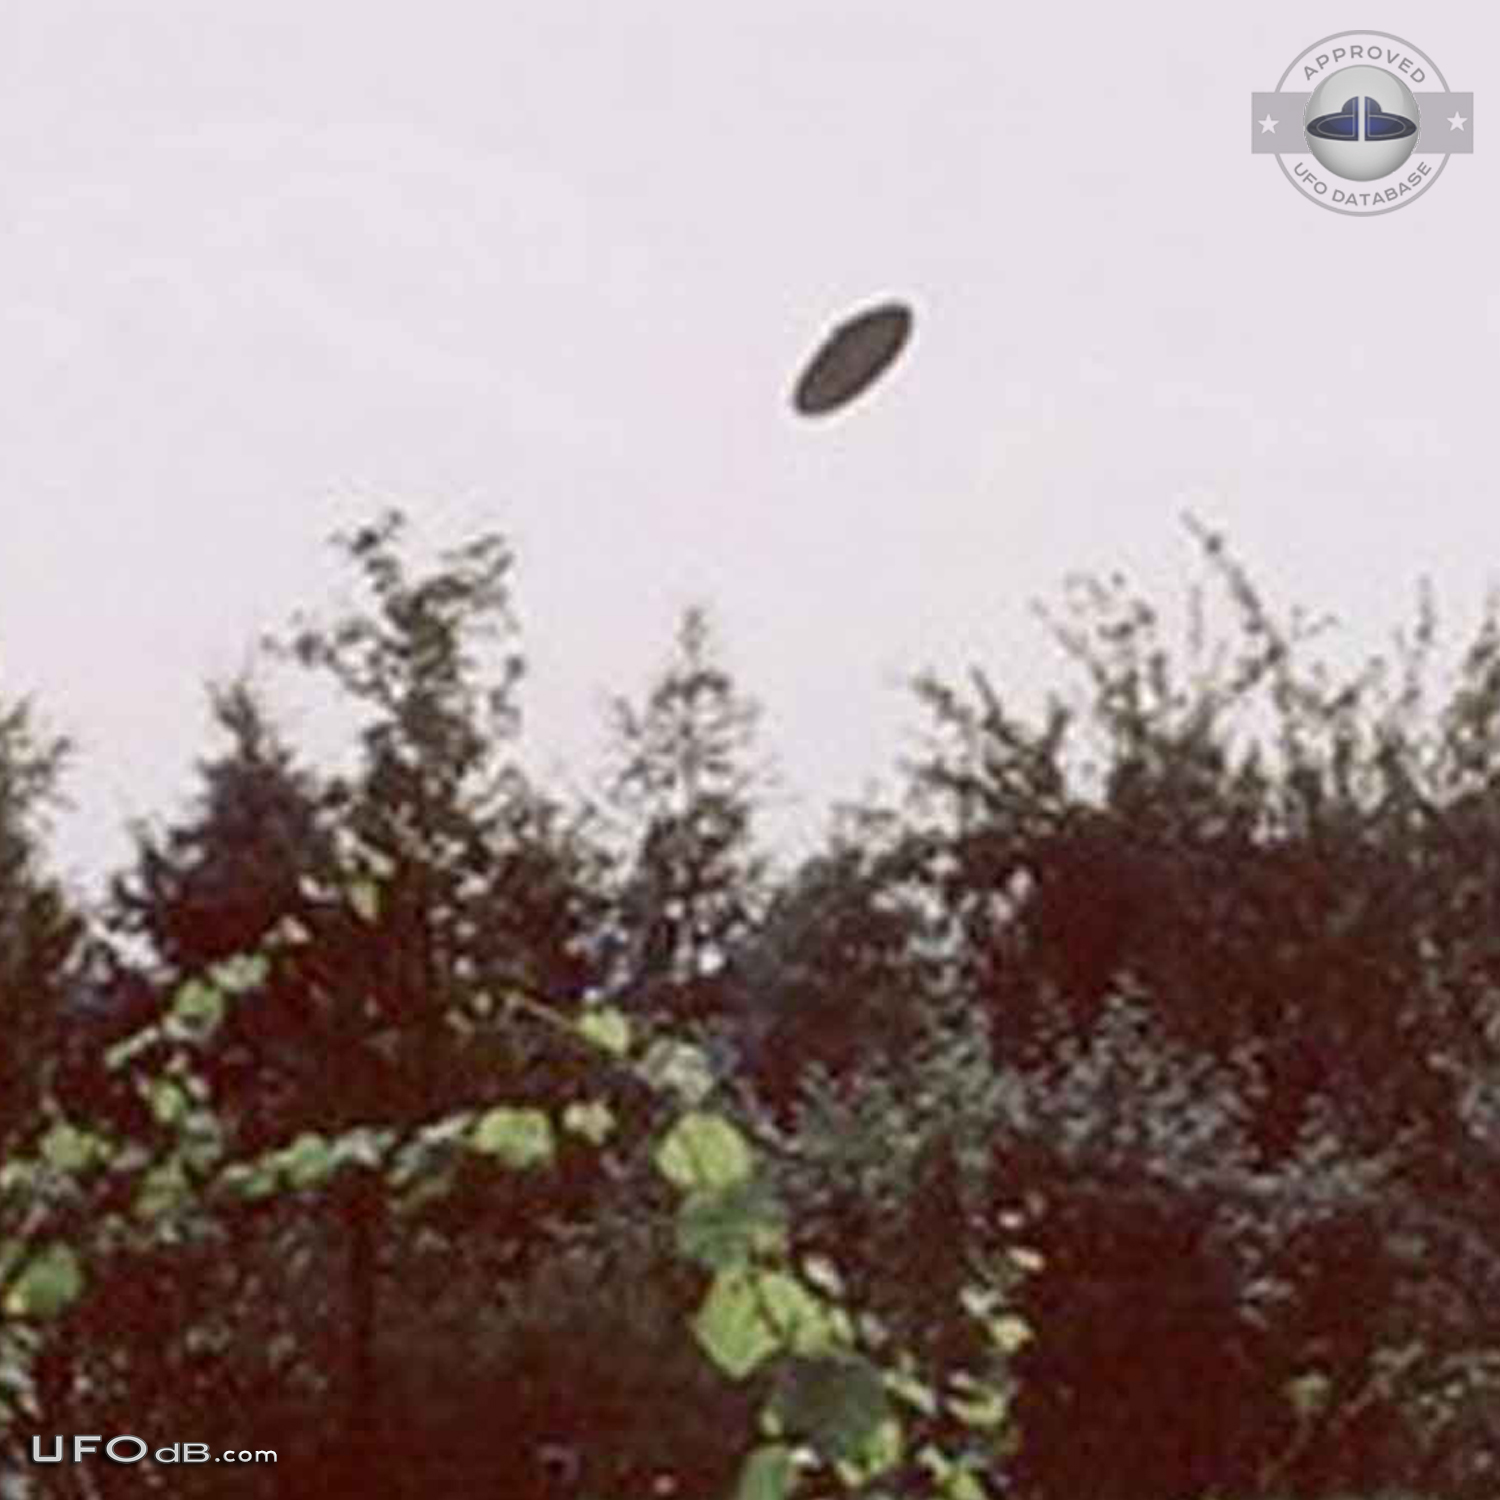 Poland 2003 Ufo sighting get aircrafts dispatched to check out the ufo UFO Picture #379-6